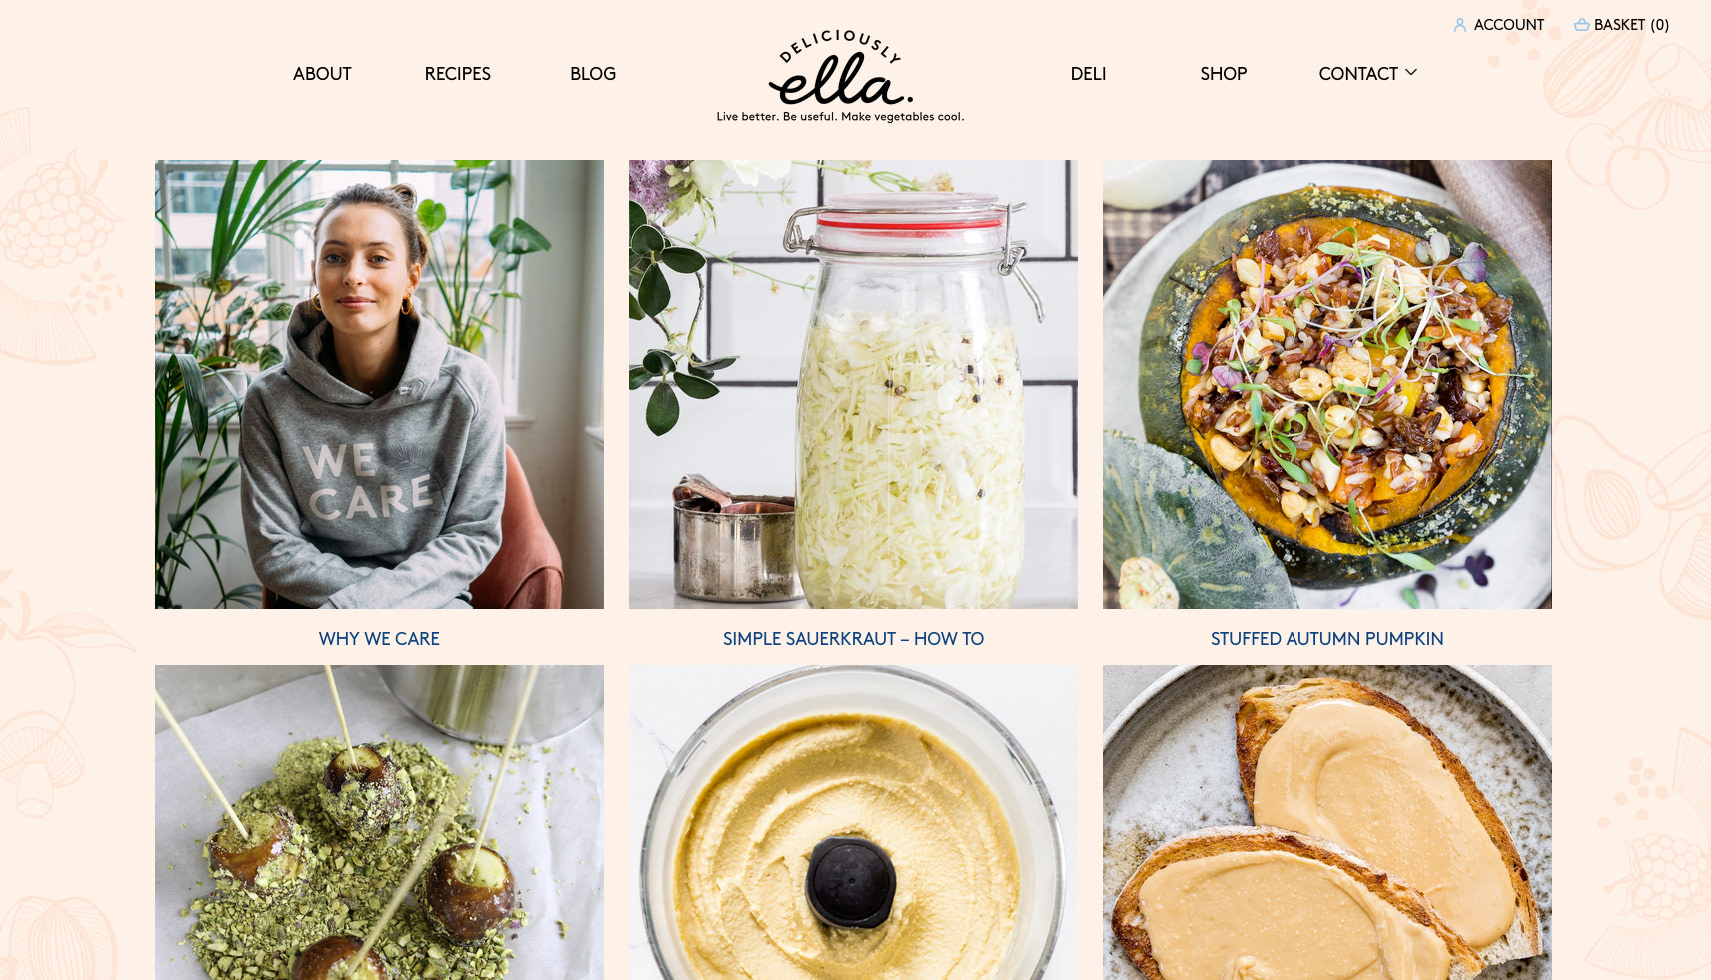 Deliciously Ella hints at the subject matter of the blog while also being catchy and memorable